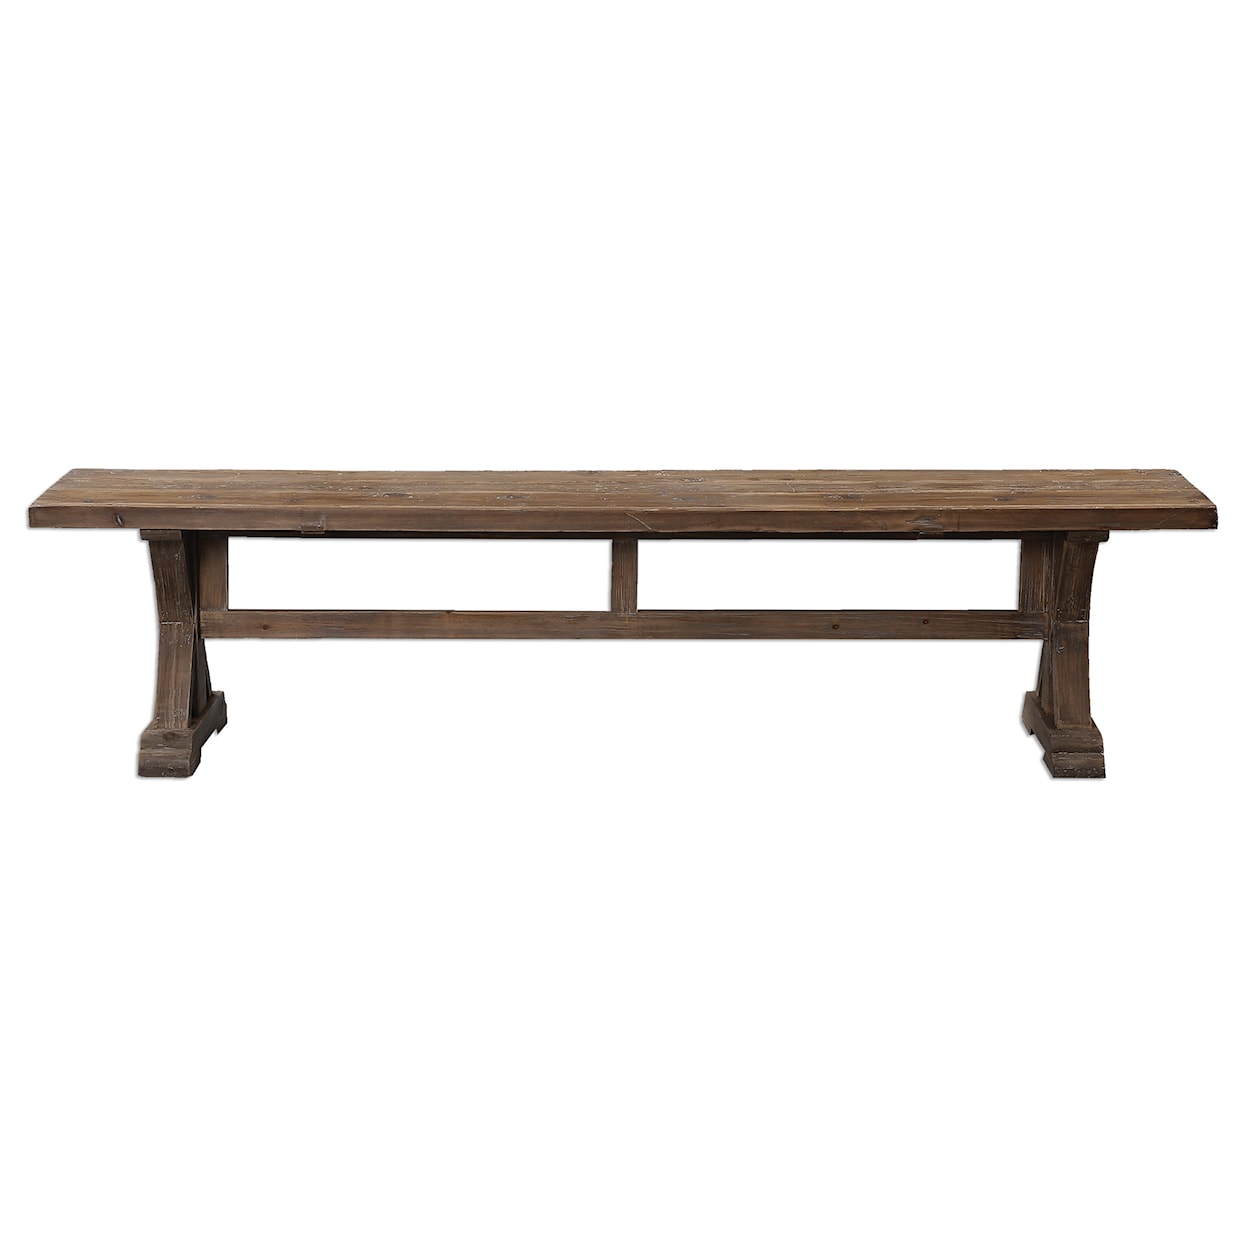 Uttermost Accent Furniture - Benches Stratford Salvaged Wood Bench